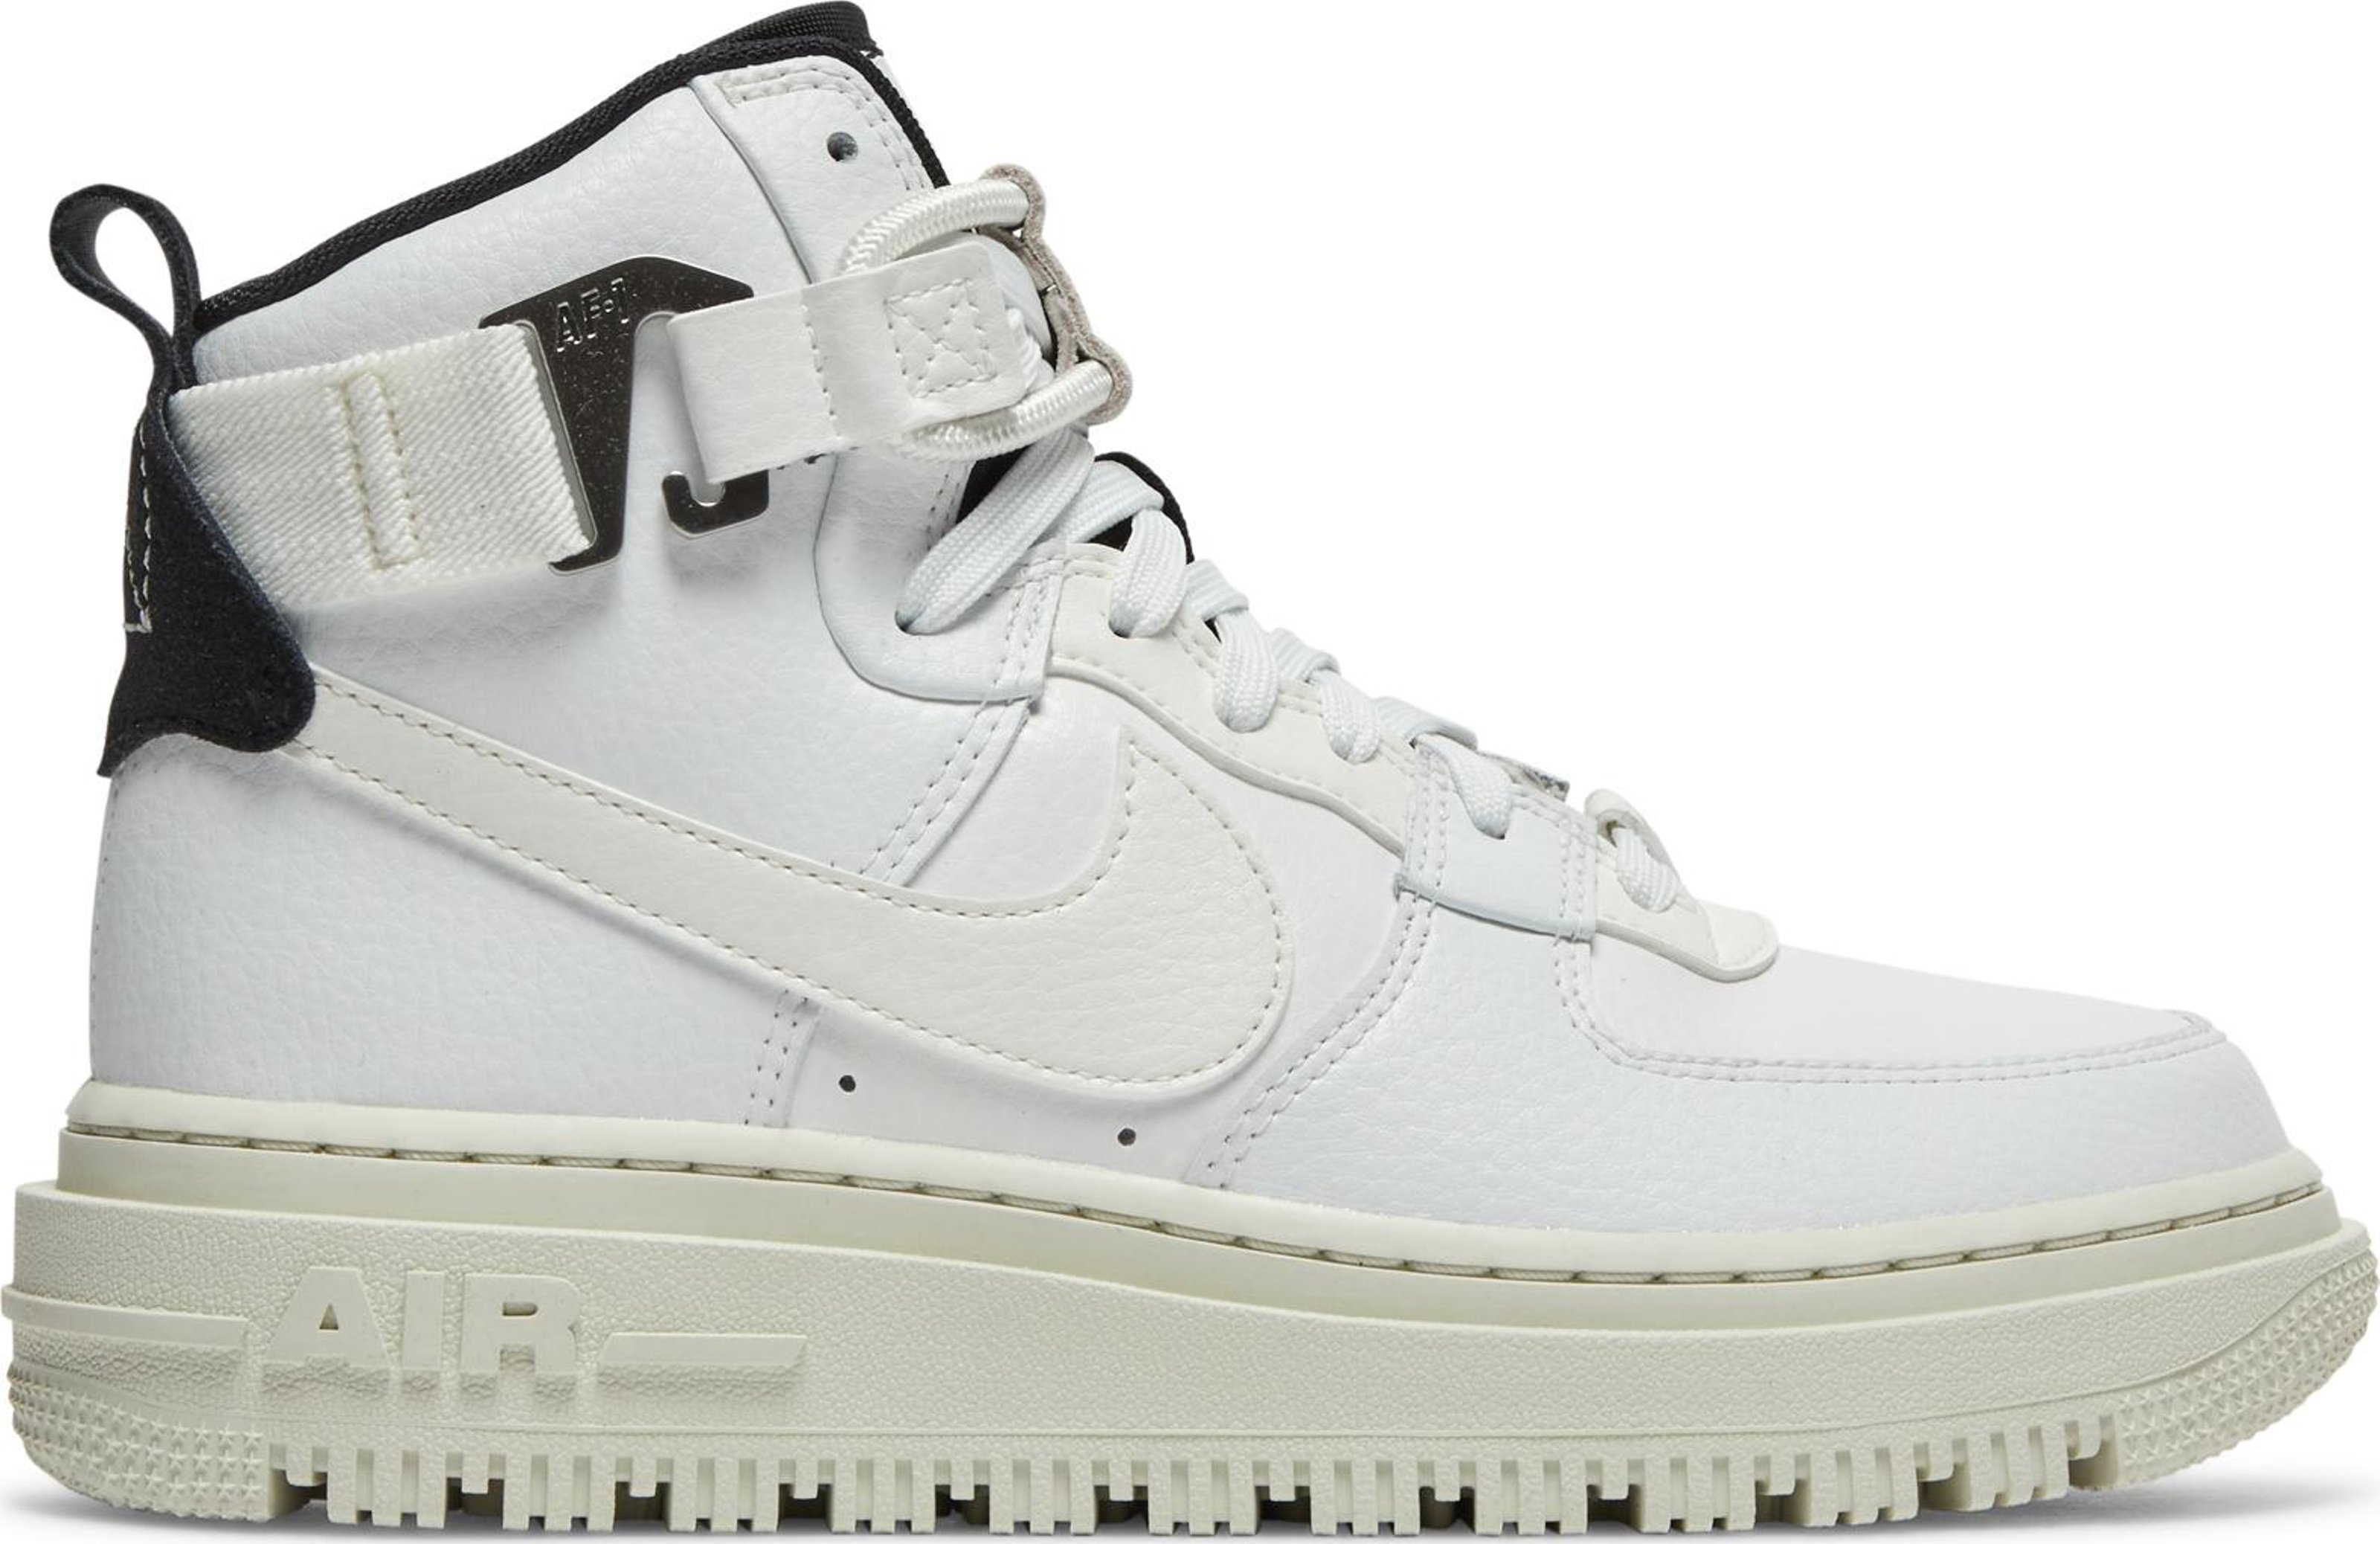 Buy Wmns Air Force 1 High Utility 2.0 'Summit White' - DC3584 100 | GOAT